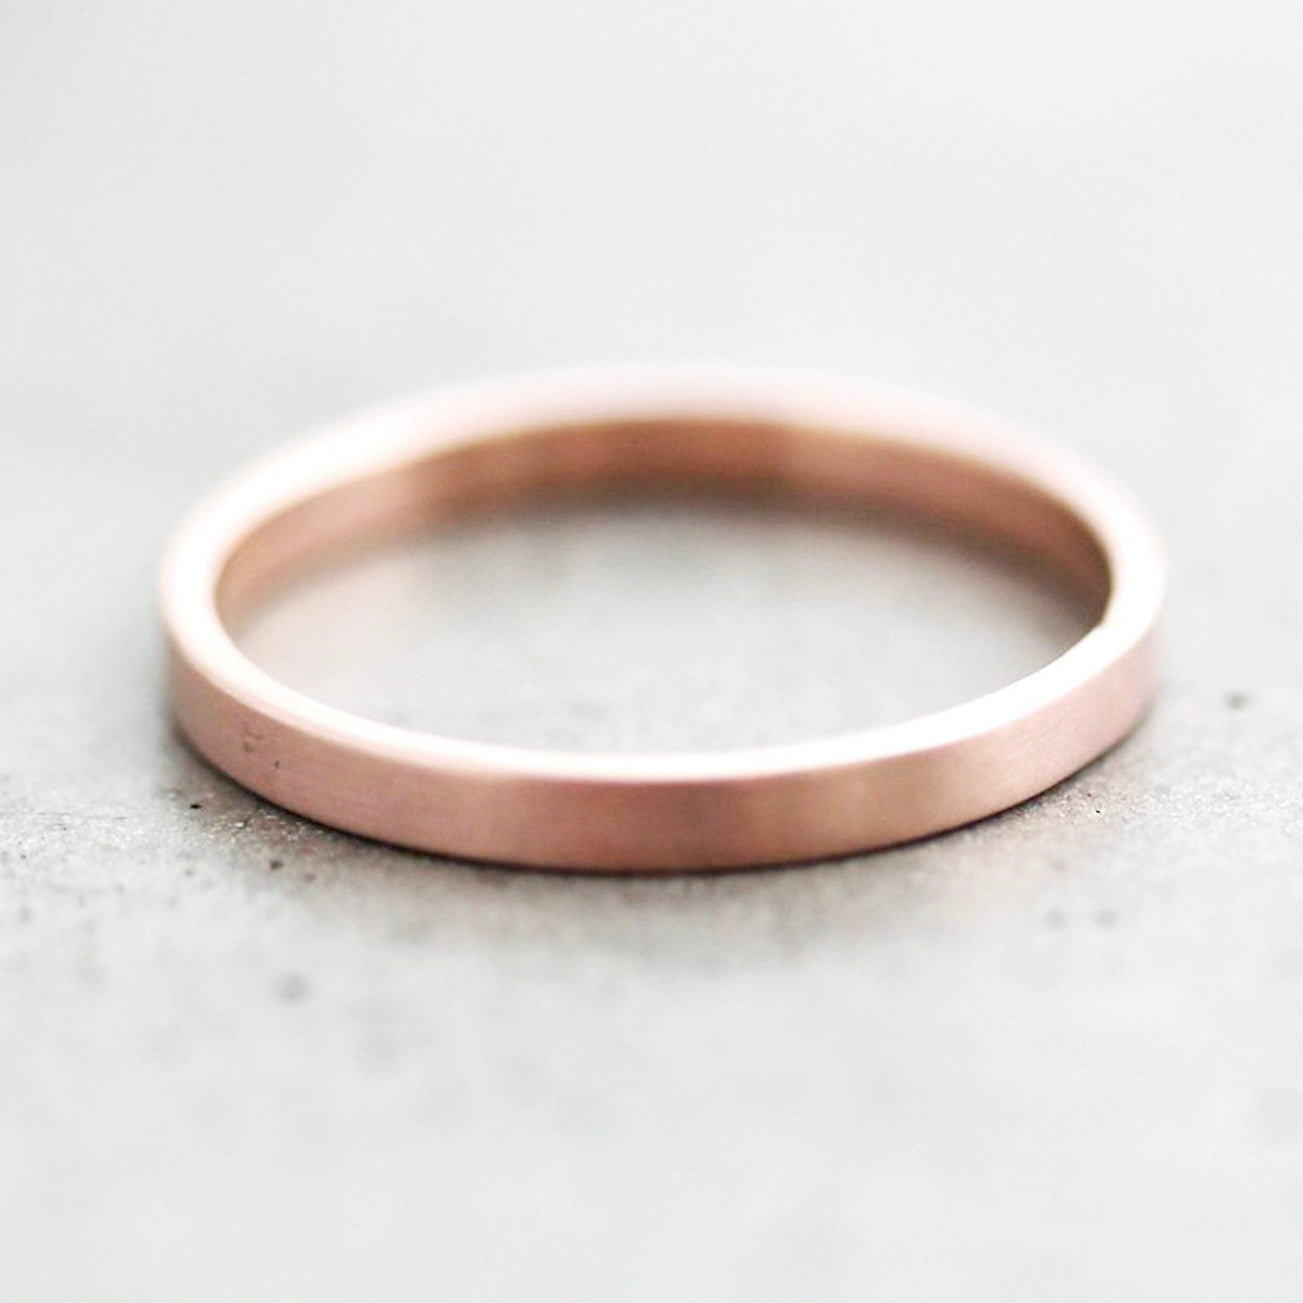 14k Gold Wedding Band 1.5mm 2mm 2.5mm 3mm - Unisex - Midwinter Co. Alternative Bridal Rings and Modern Fine Jewelry